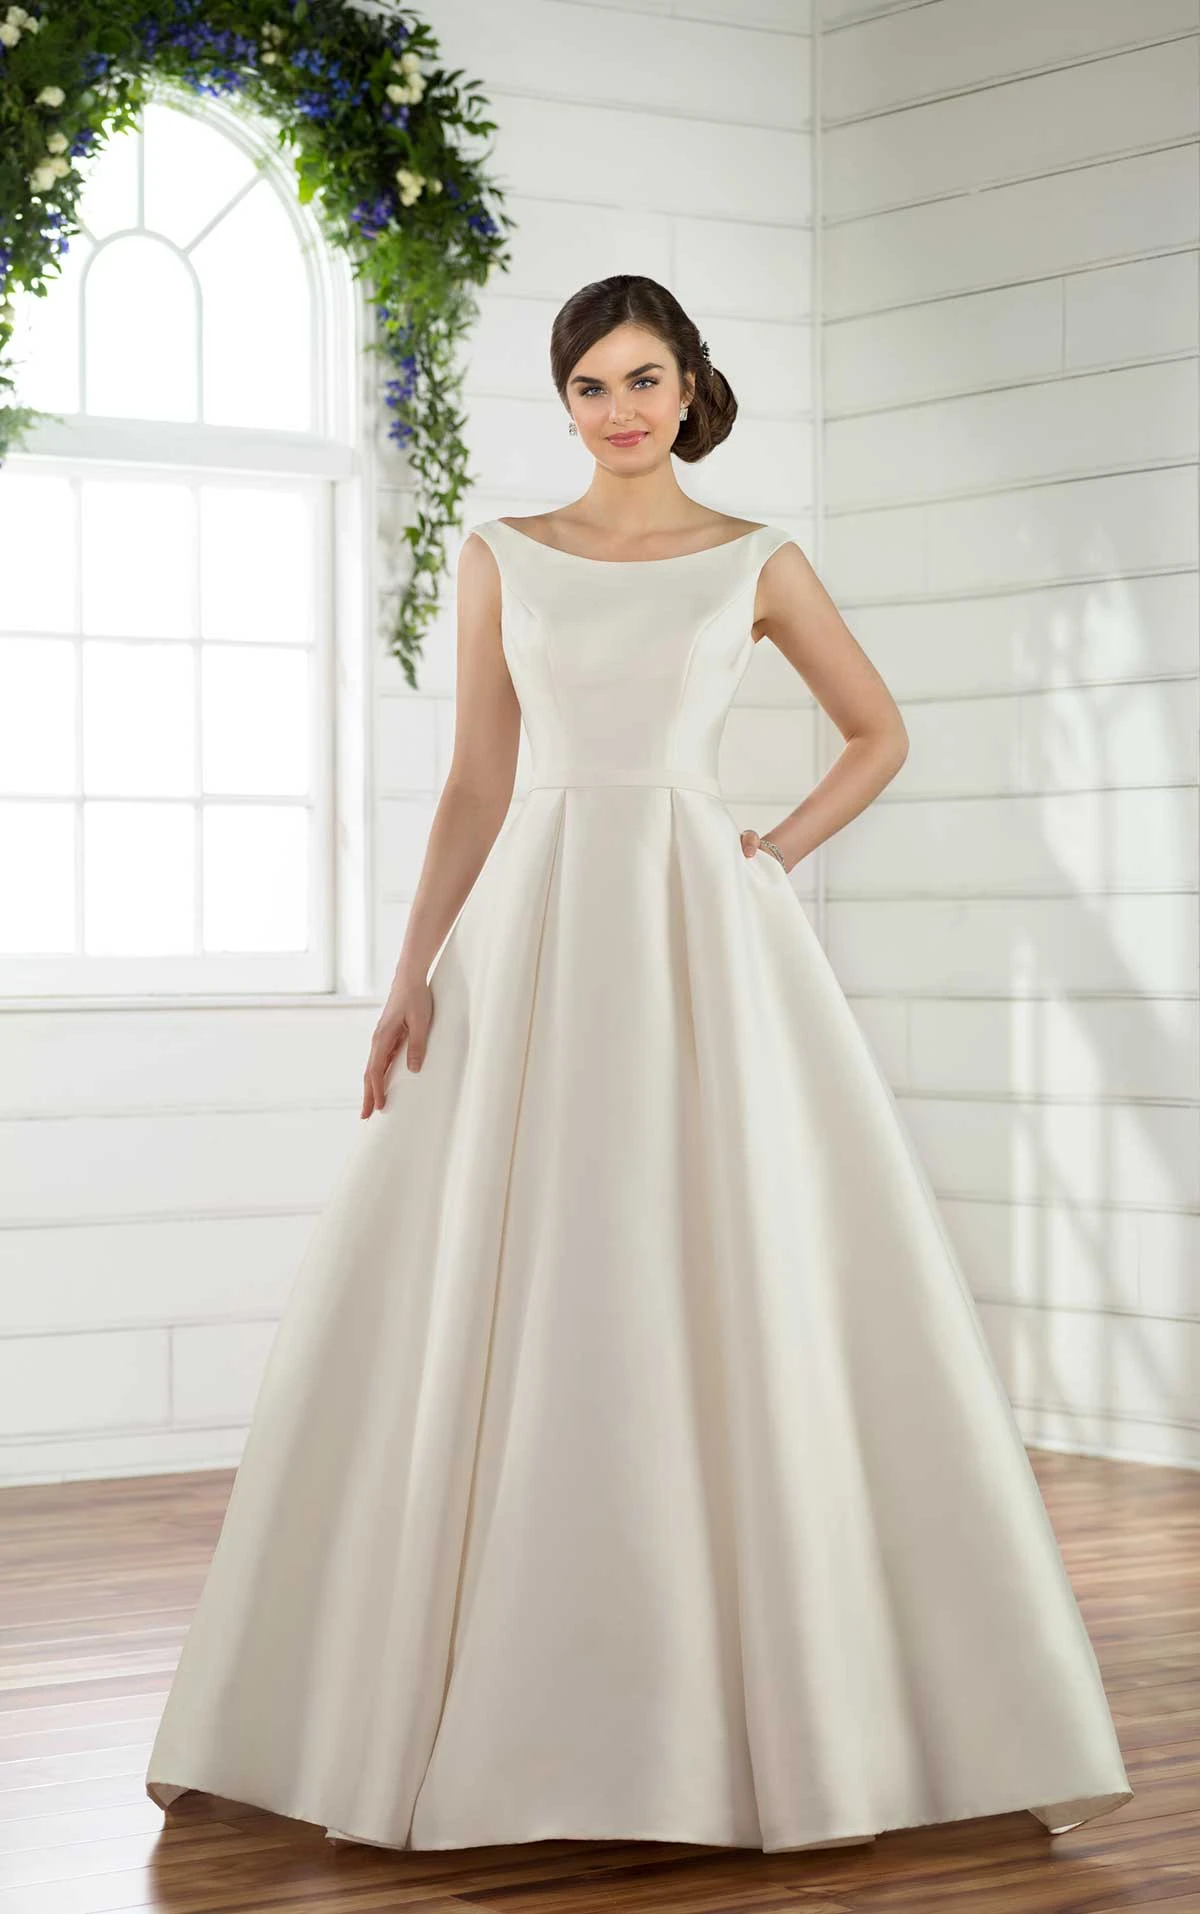 traditional wedding gown styles